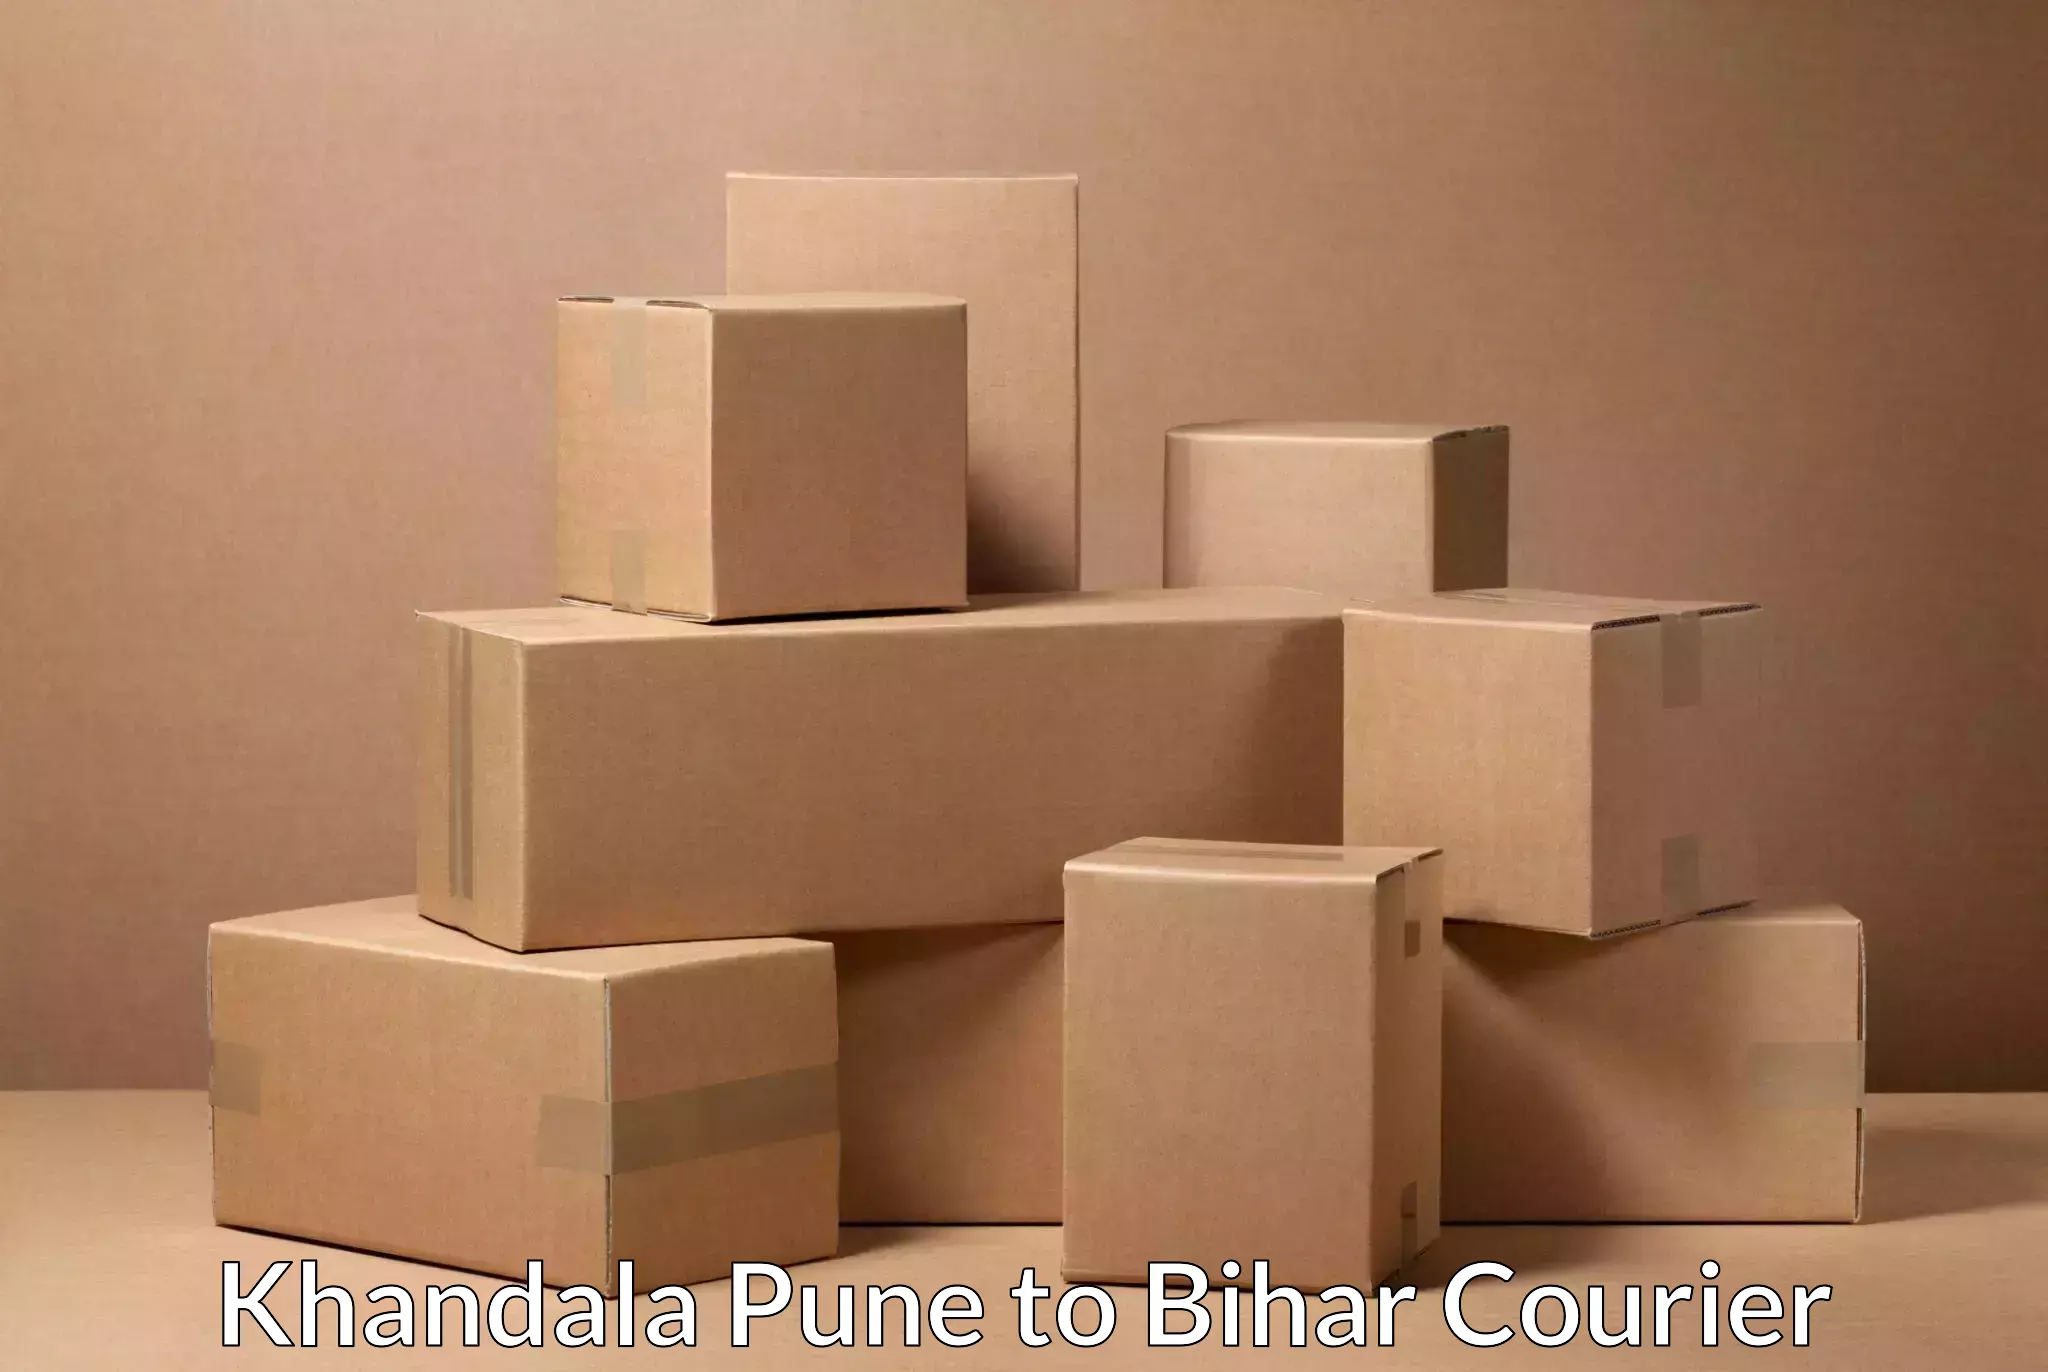 Postal and courier services Khandala Pune to Sharfuddinpur